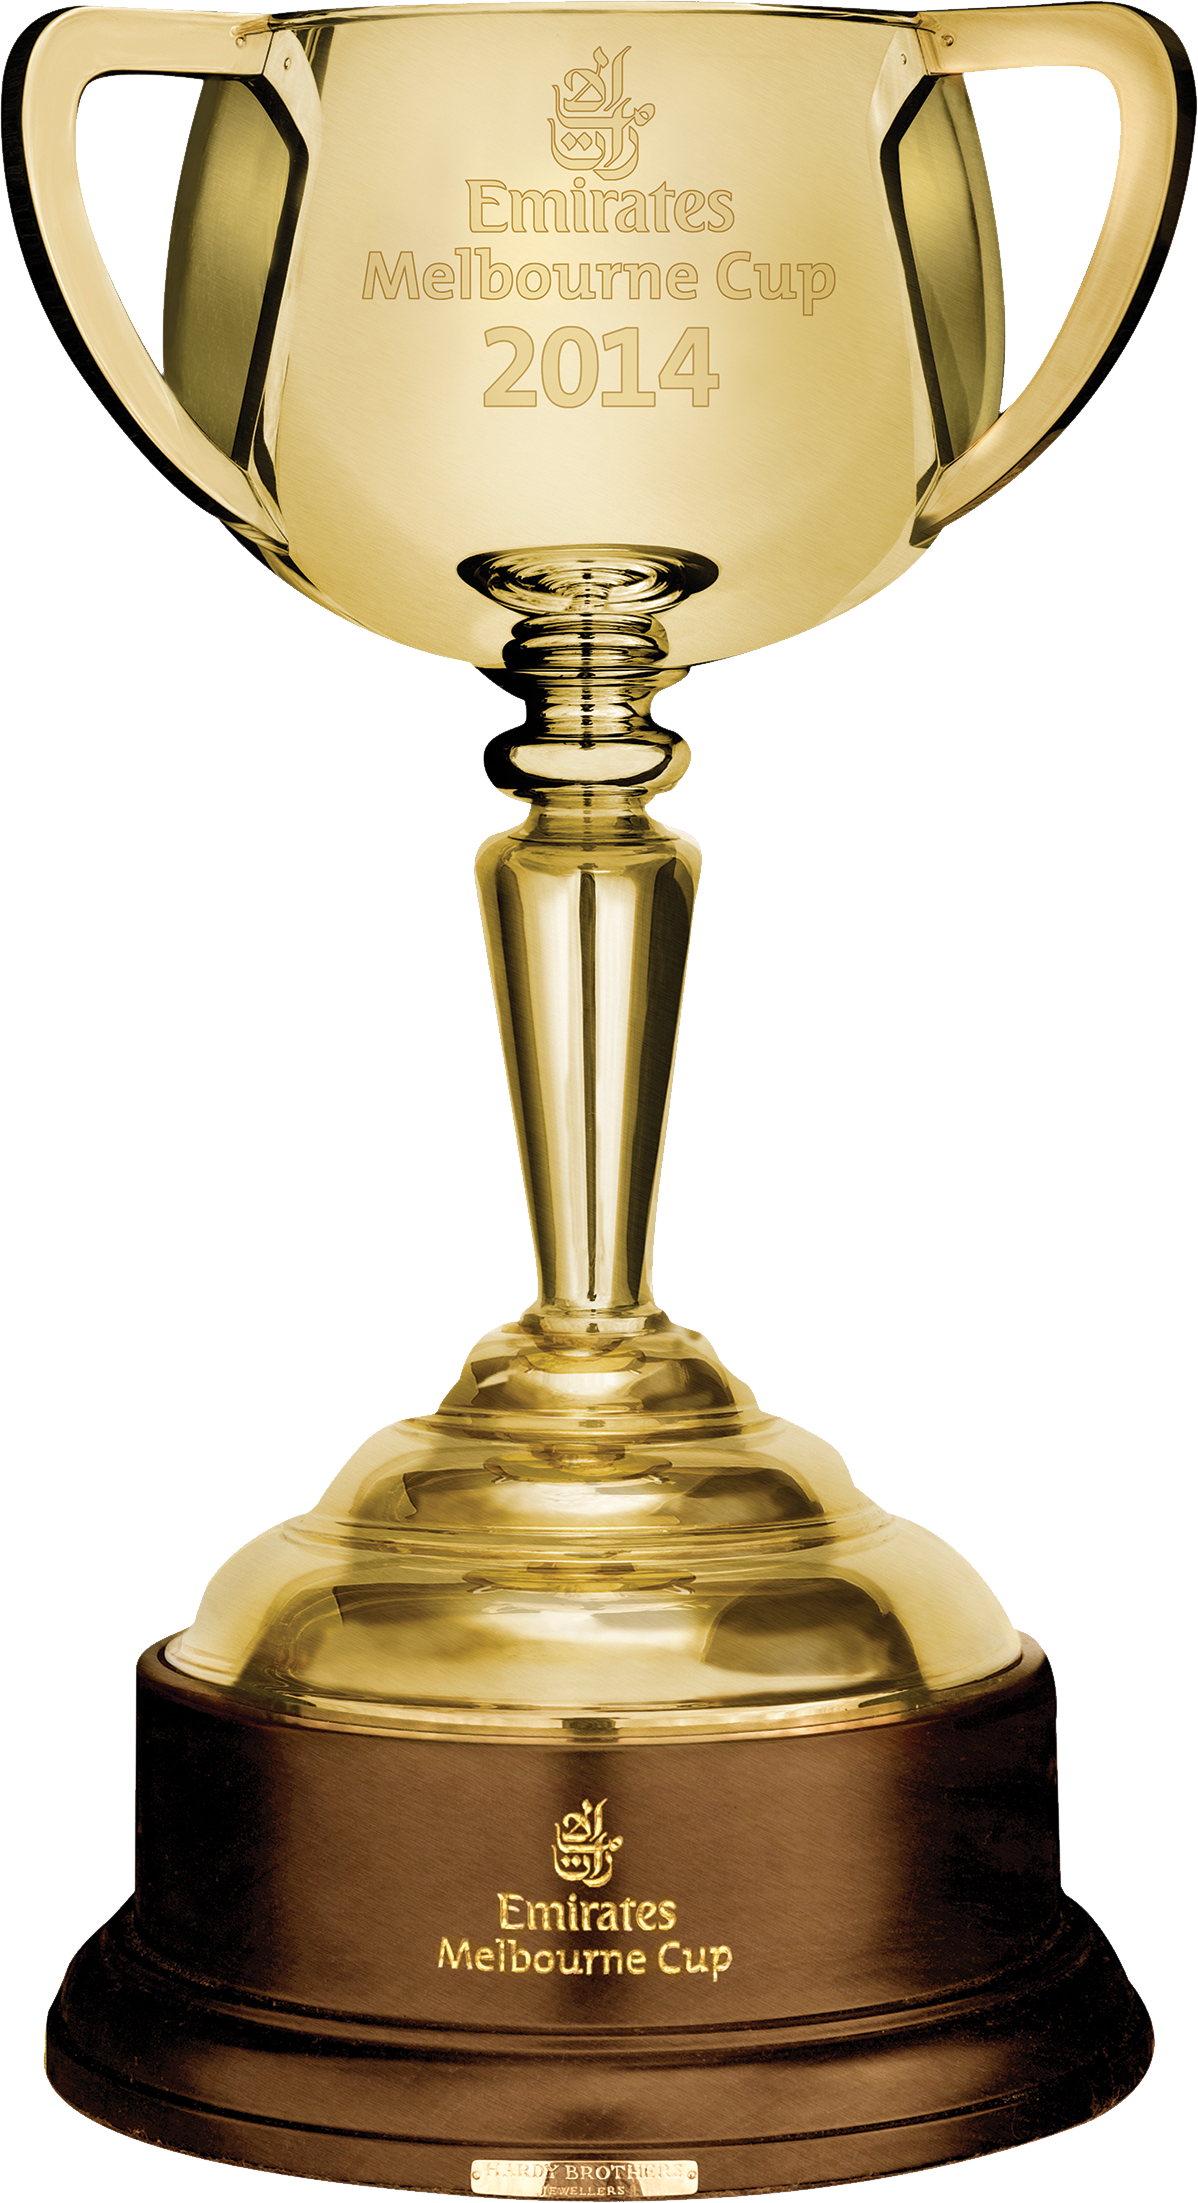 Golden cup PNG images 